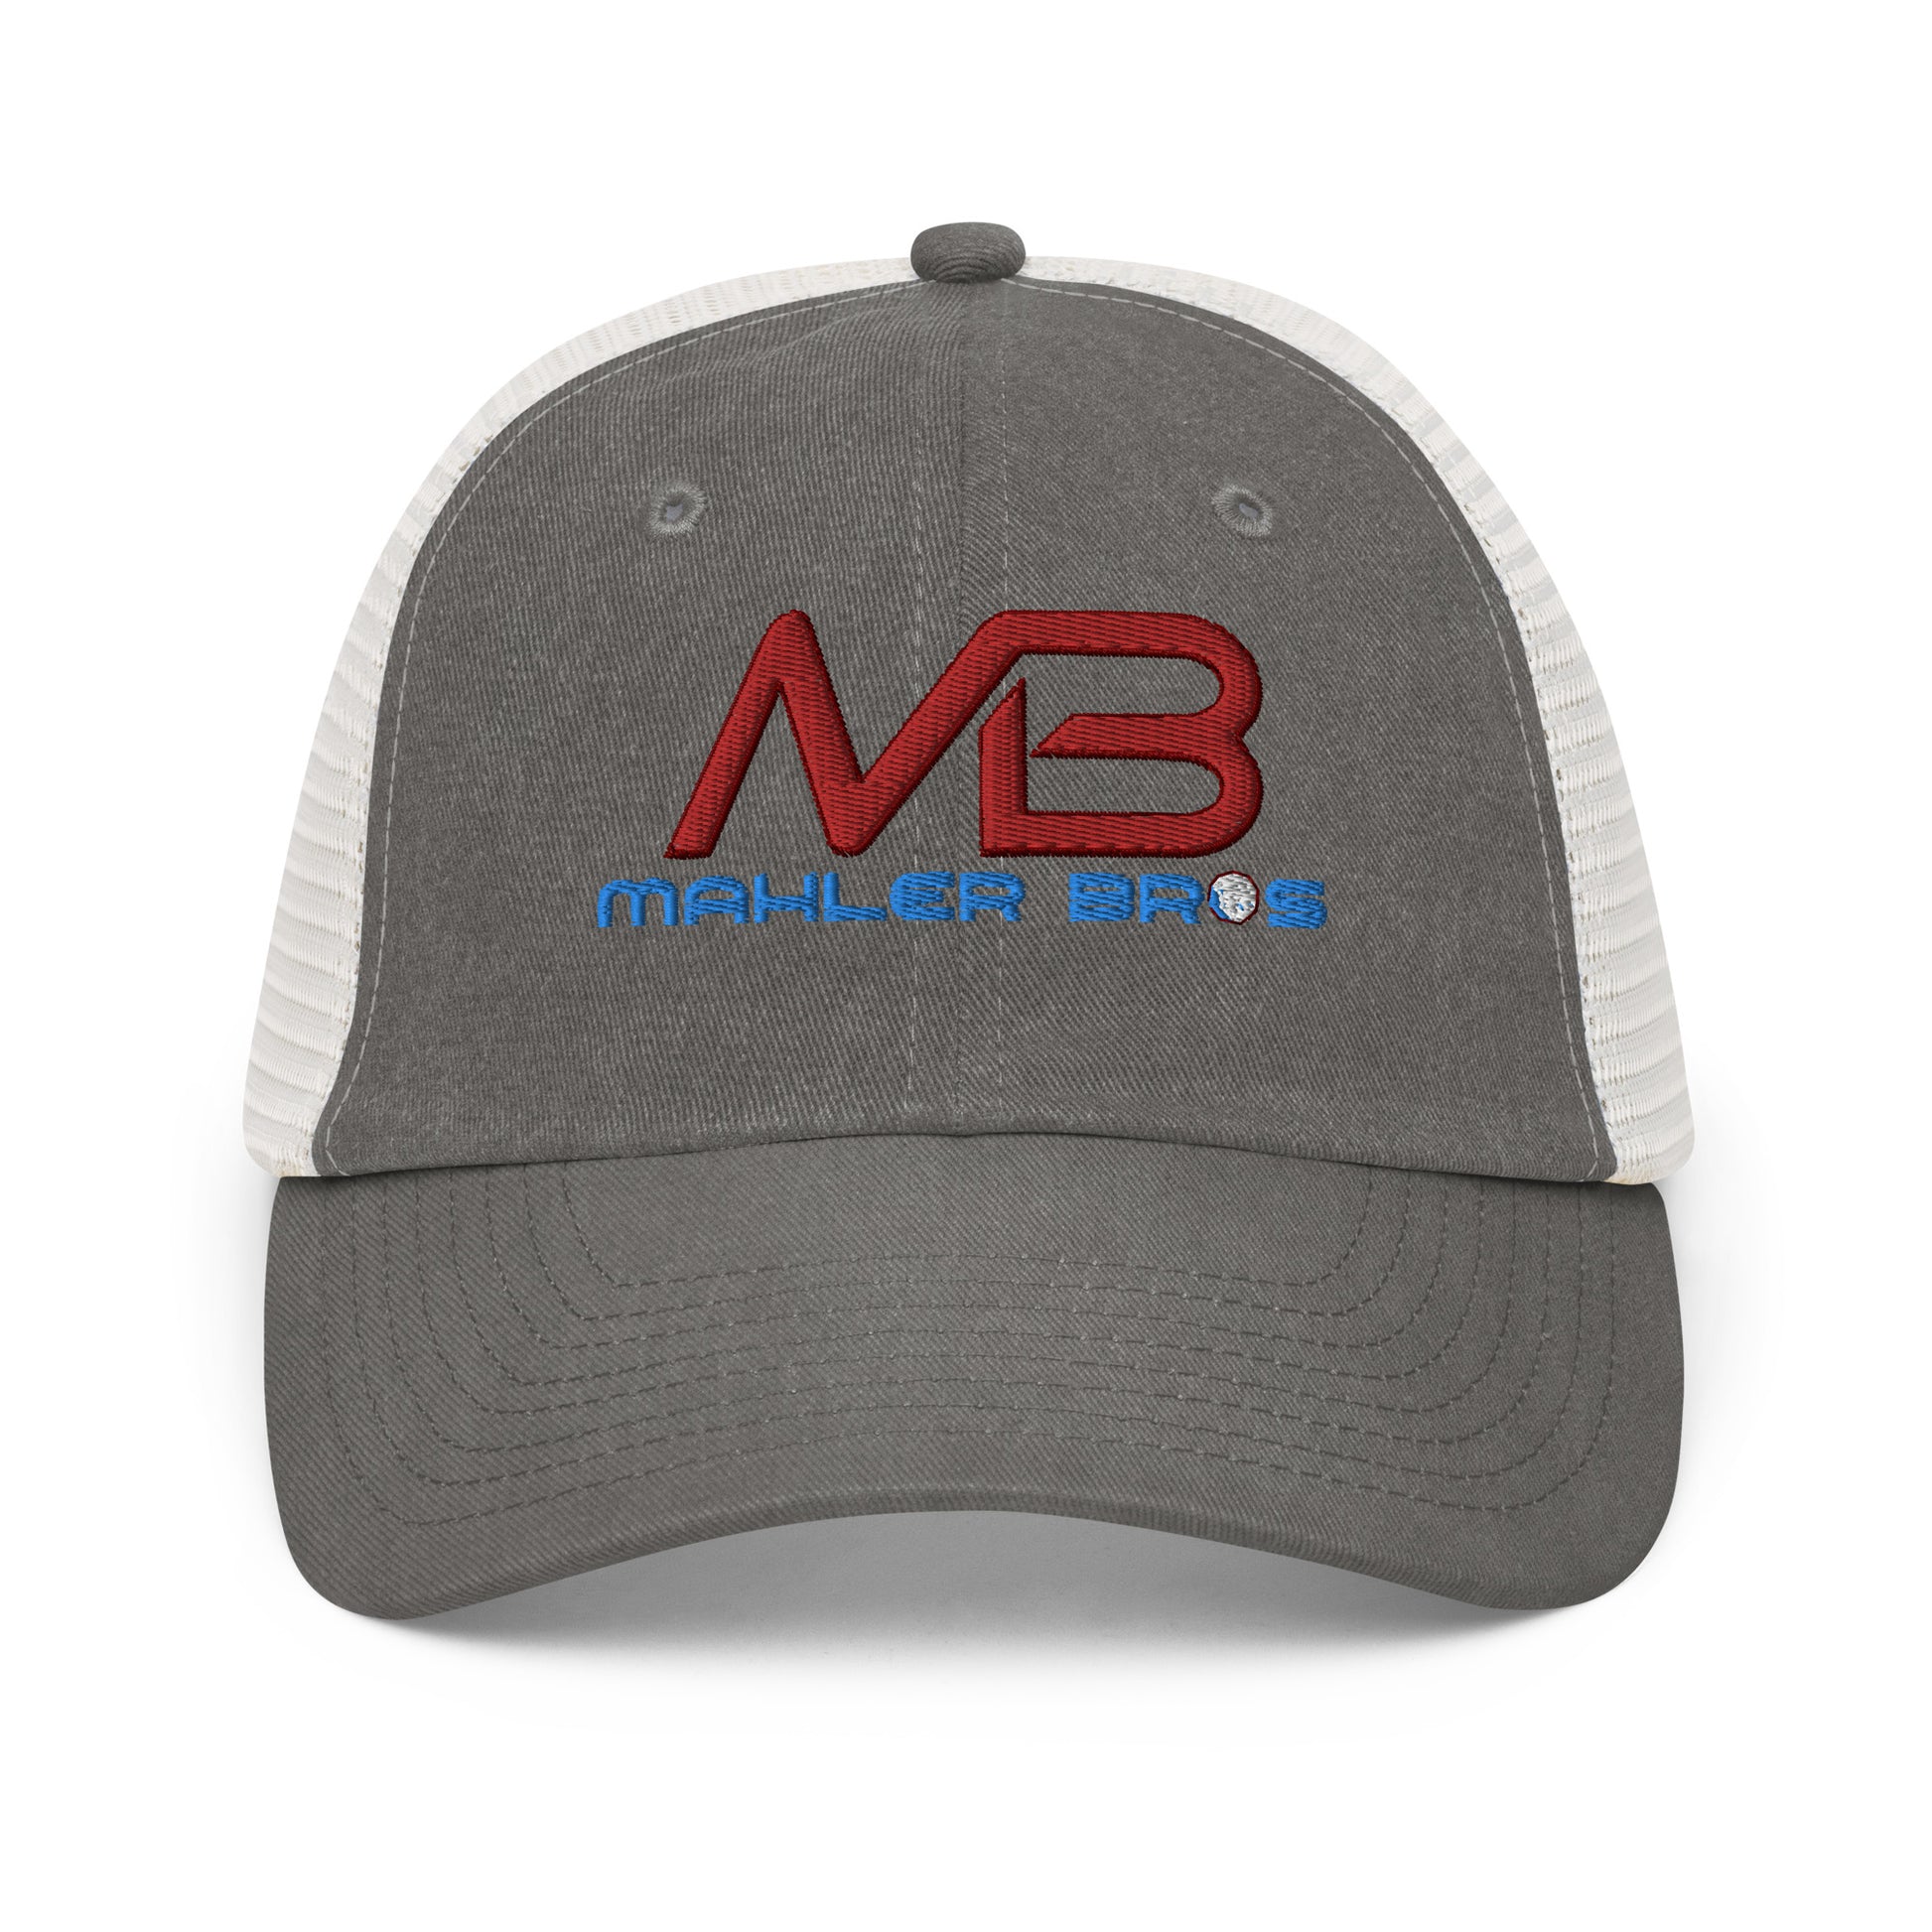 Mahler Bros Embroidered Pigment-dyed cap